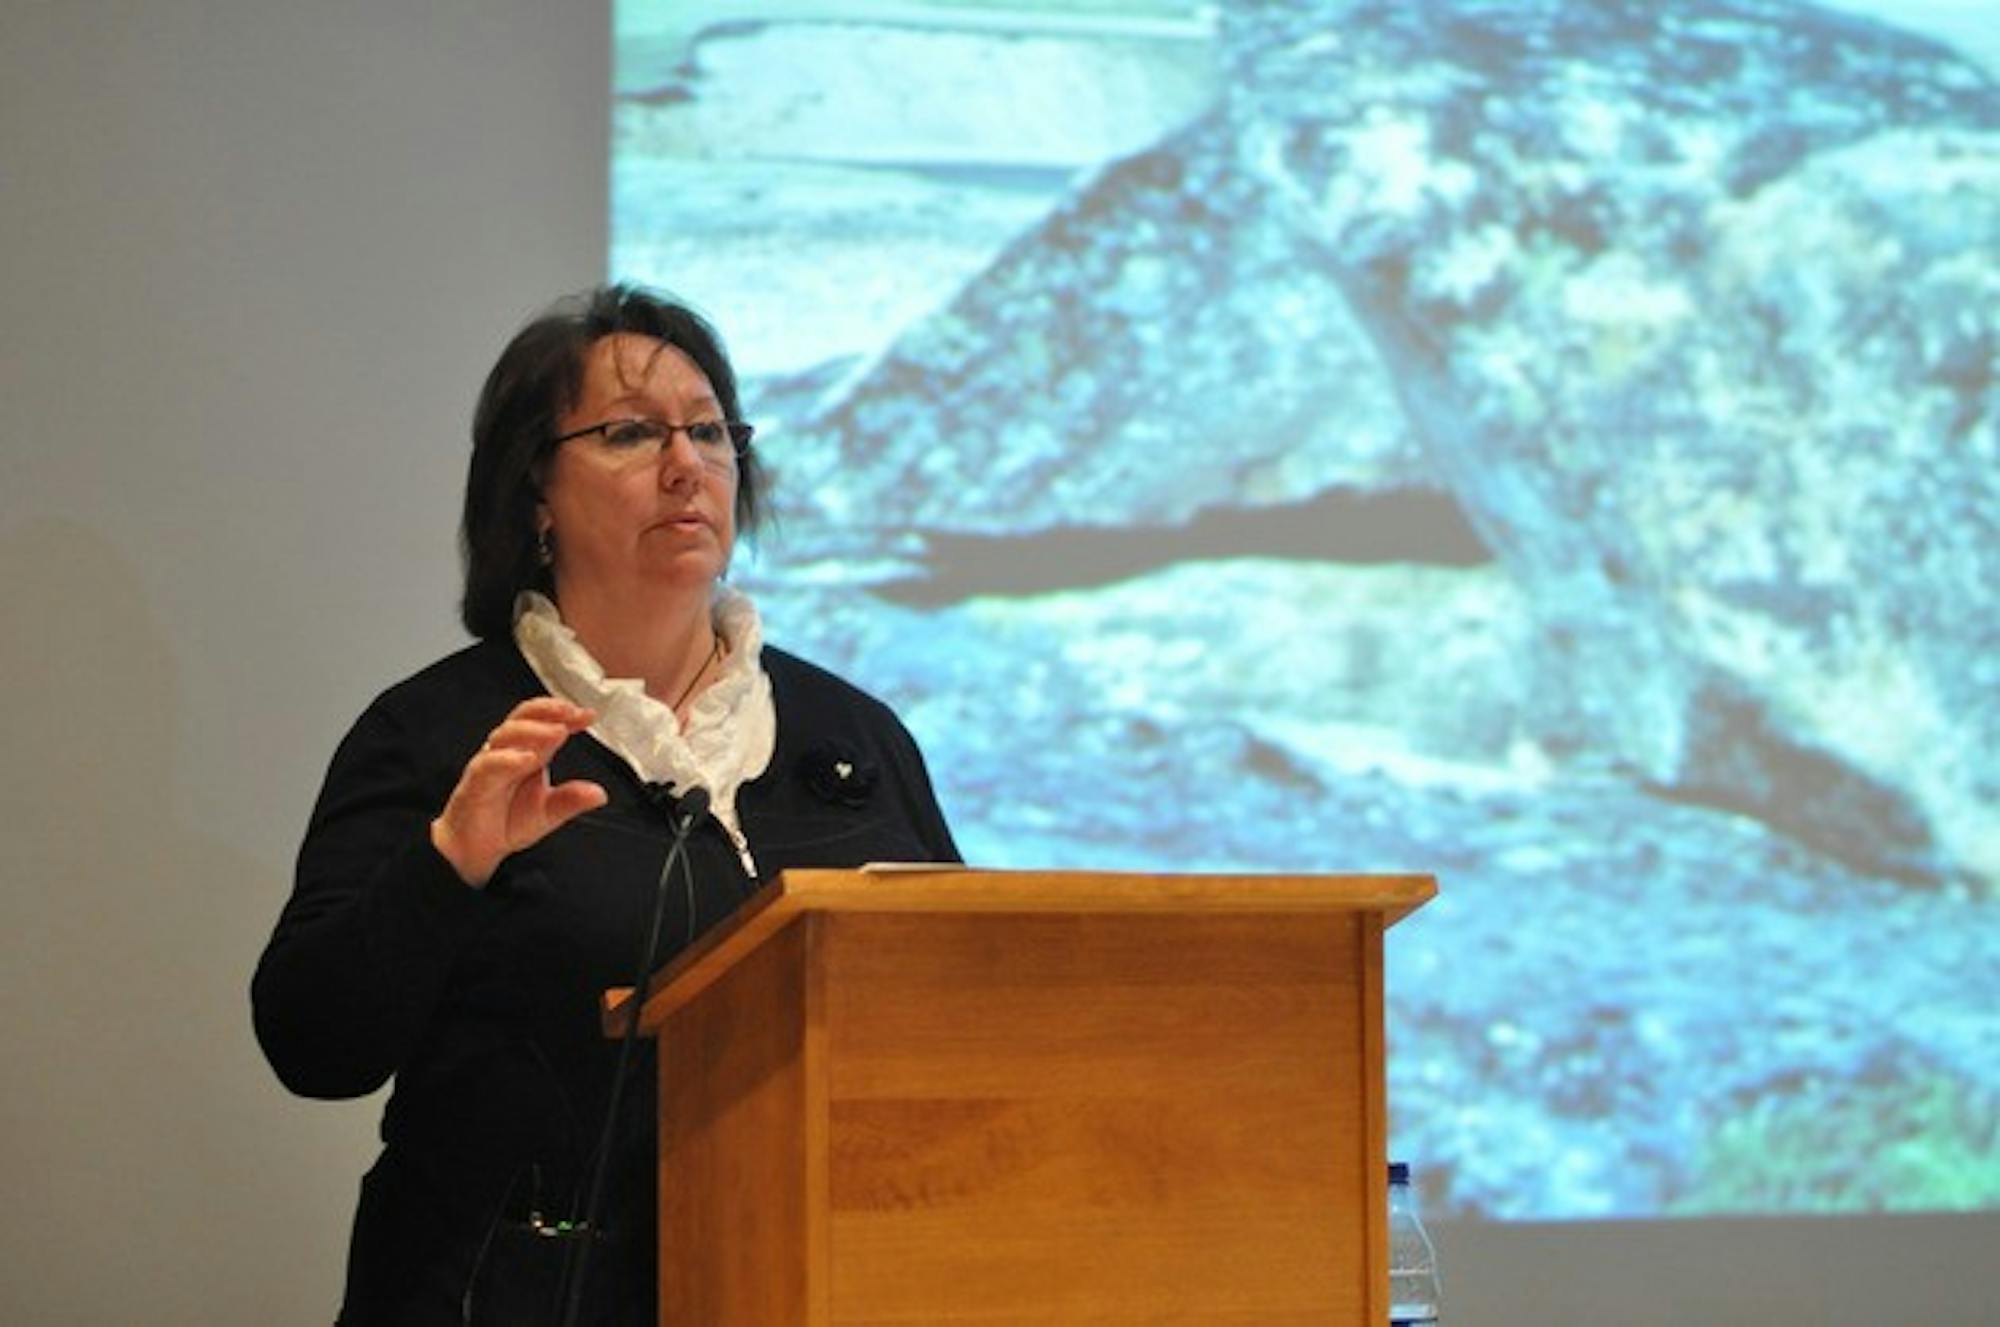 Nobel Peace Prize nominee Sheila Watt-Cloutier said the Arctic is the world's barometer on climate change' in her lecture on Tuesday.